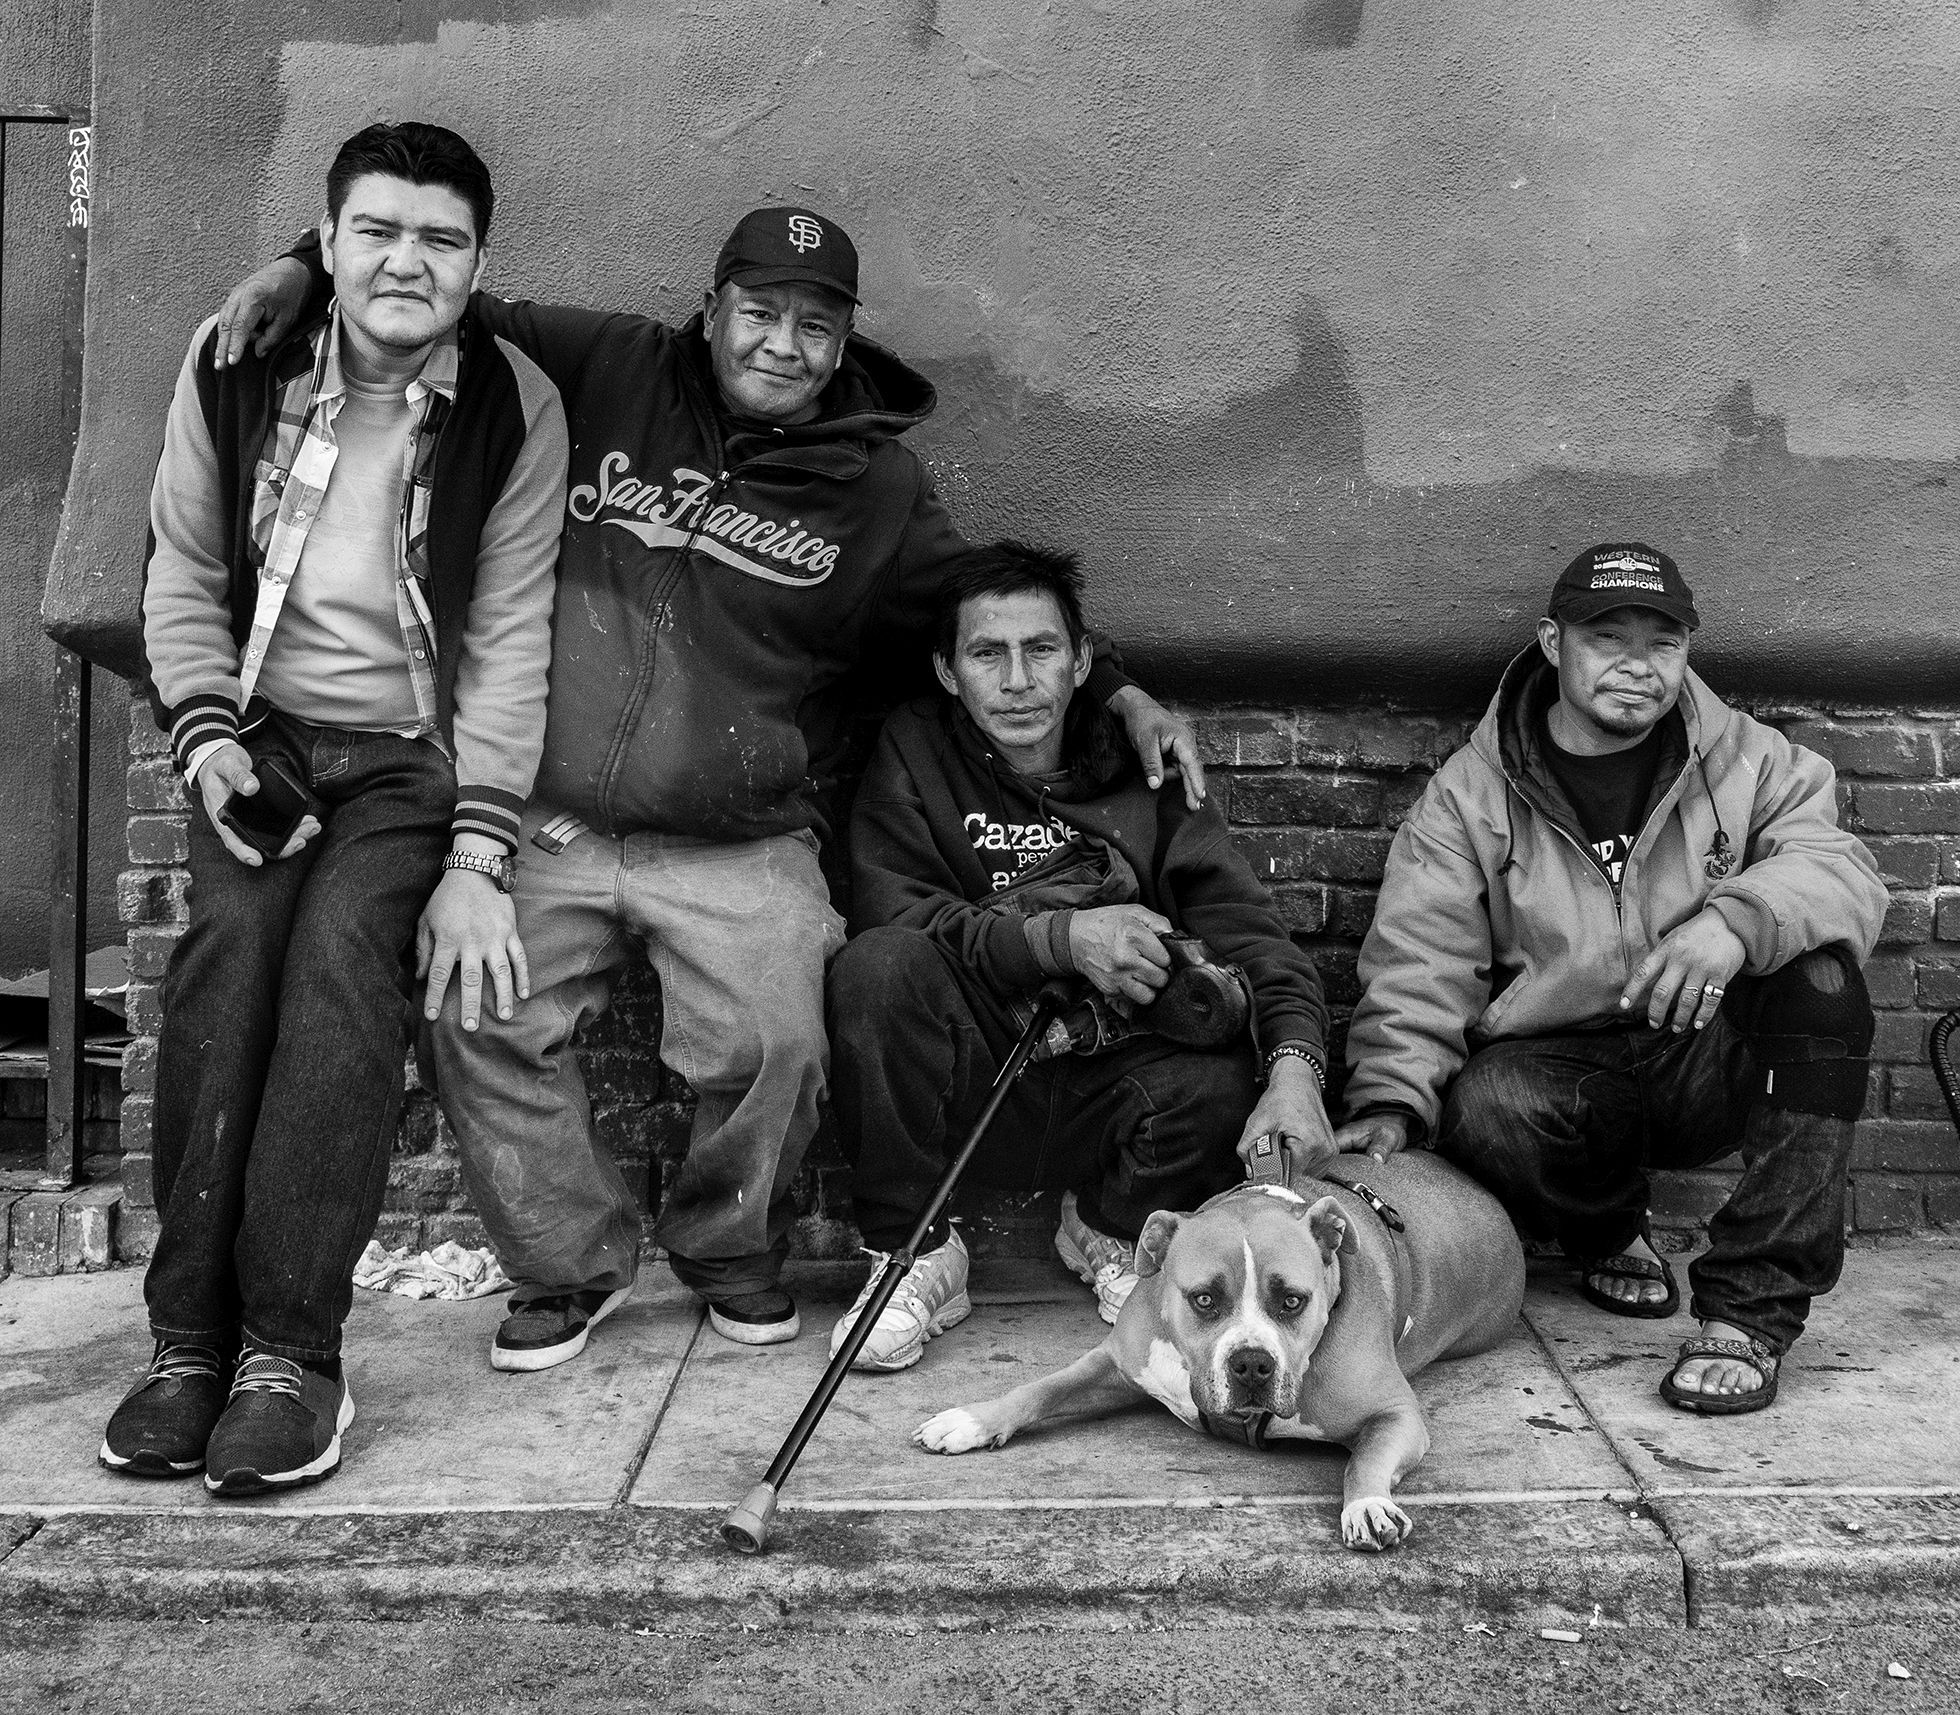 Manuel, Franco, Edwin, Jorge, and Cabezón, Edwin’s pit-bull mix, gather on a sidewalk in San Francisco in October 2019. Franco smiles and he has his arms over the shoulders of Manuel and Edwin, and both Edwin and Jorge have a hand on Cabezón’s back.